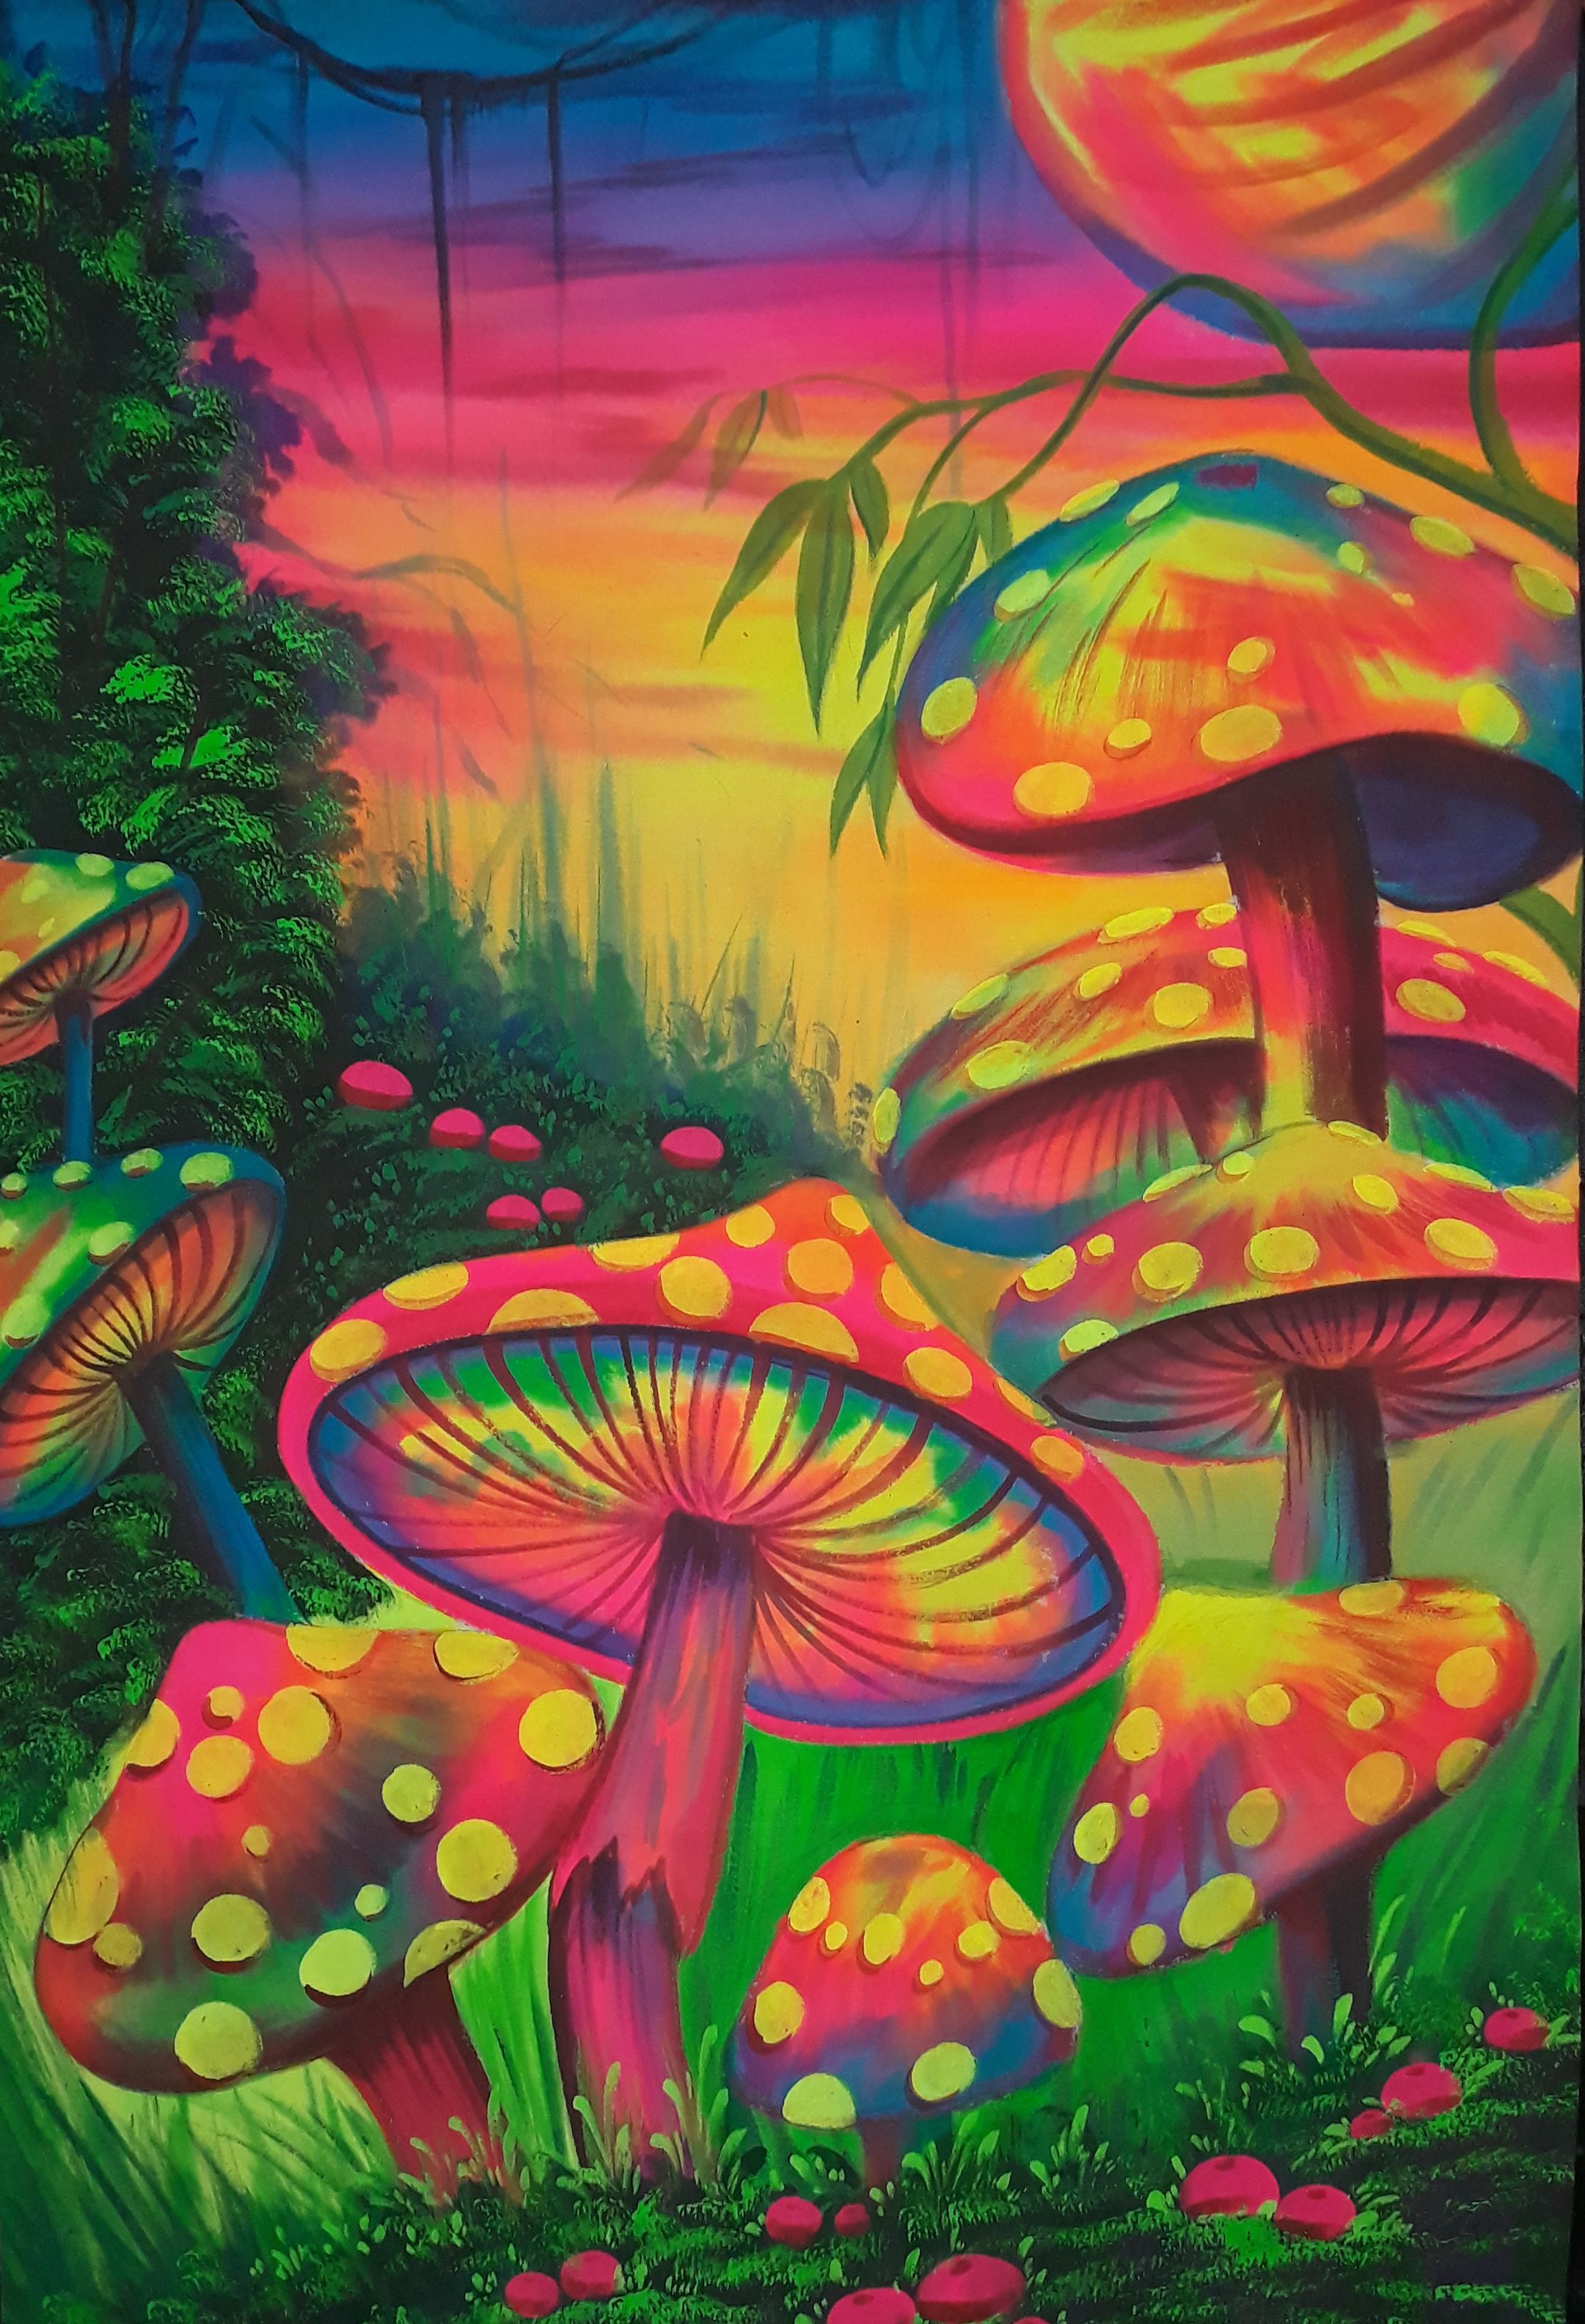 A painting of mushrooms in the forest - Mushroom